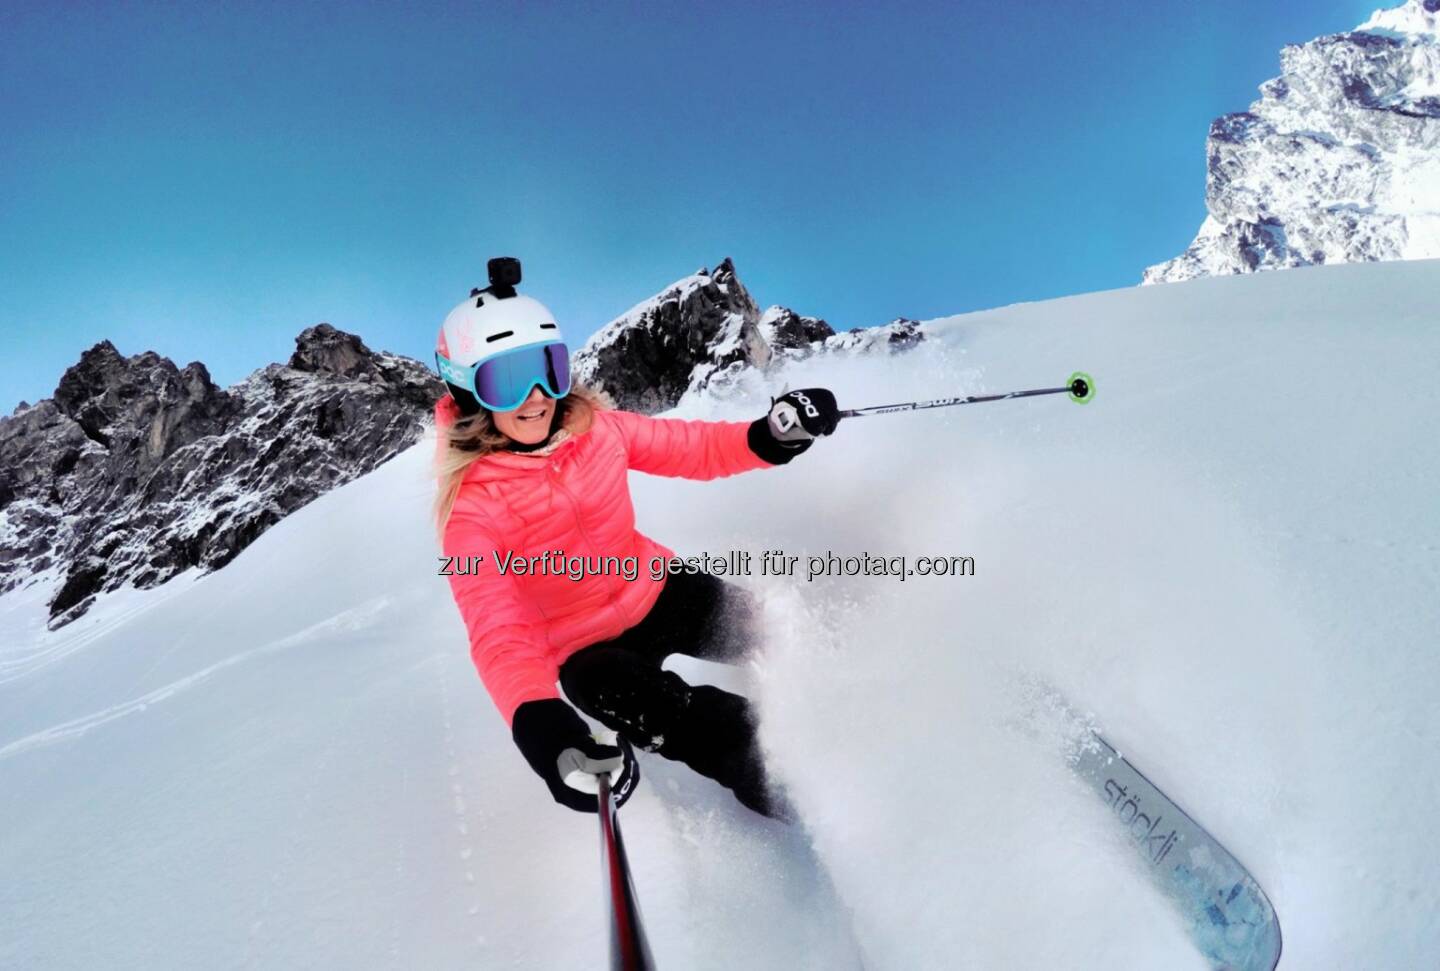 It's that time! Olympian Julia Mancuso is here for a Q + A! 

She'll be giving away a HERO4 Session + a winter bundle to one lucky participant so hit her with your best questions.  Source: http://facebook.com/gopro